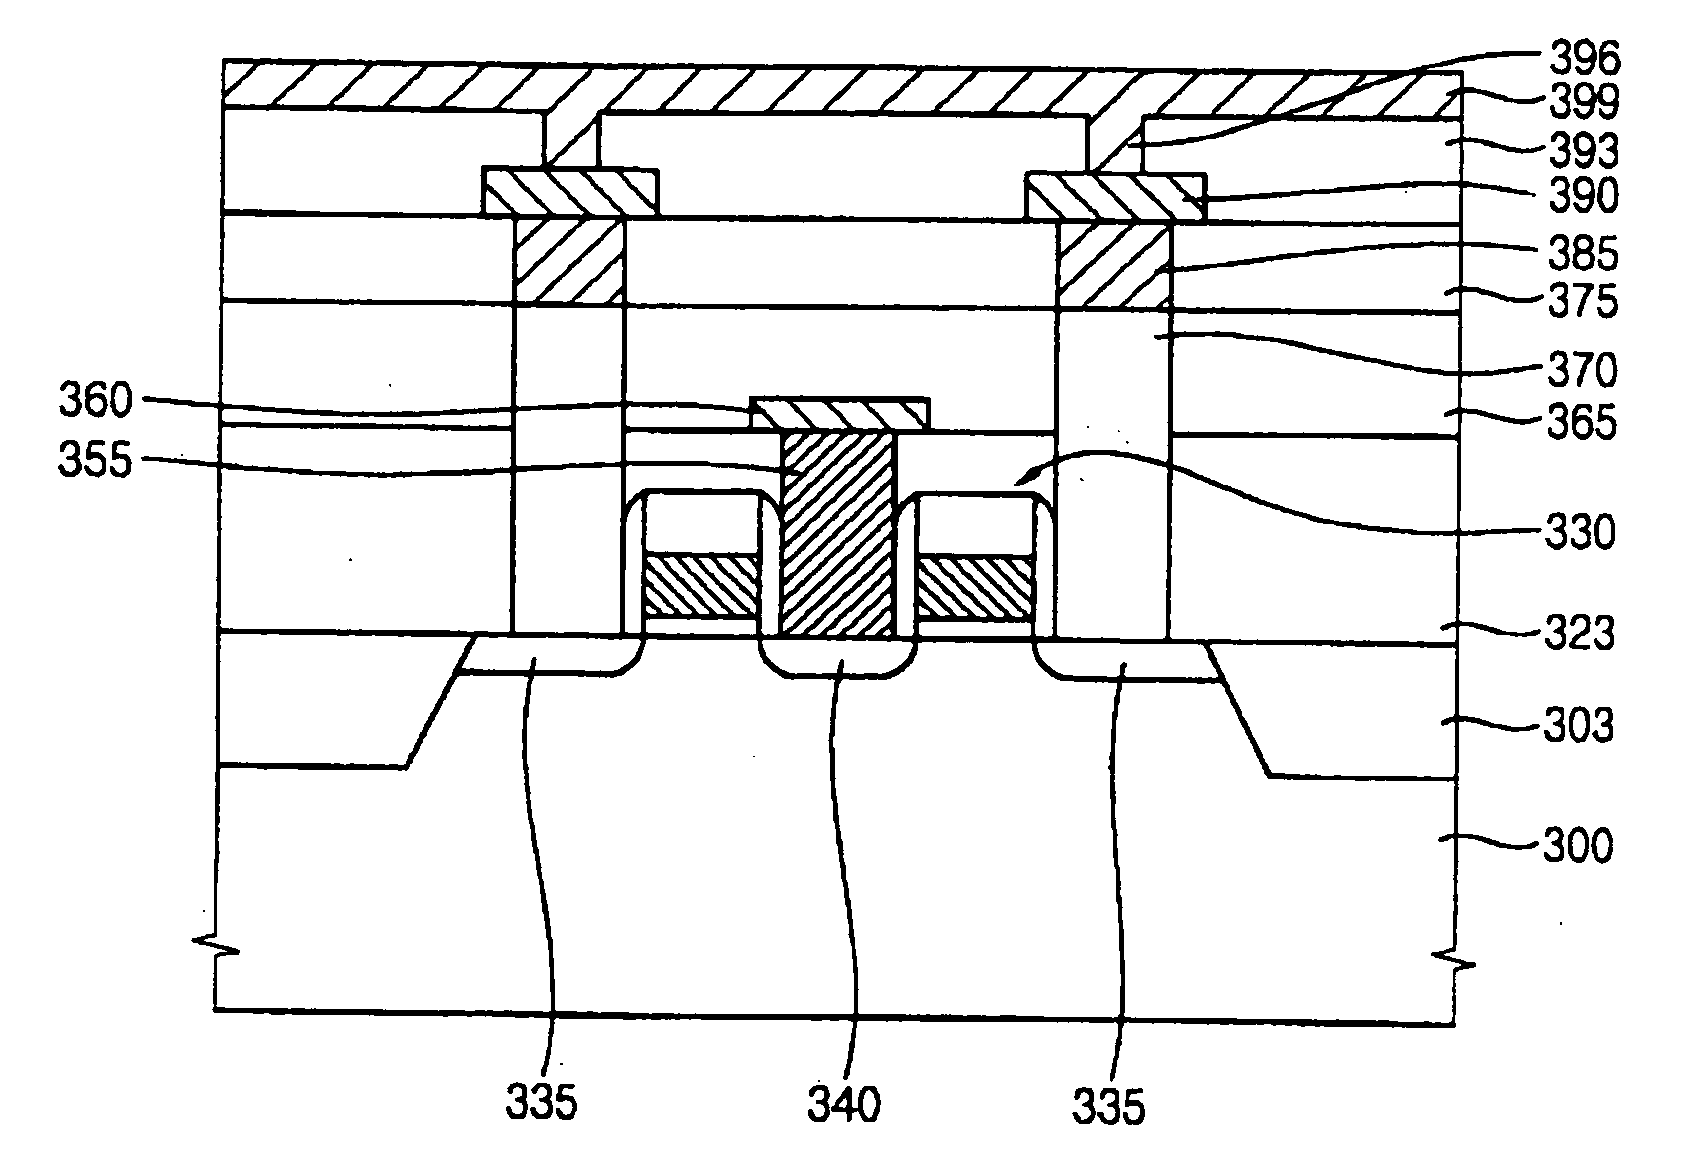 Methods of forming a phase-change material layer pattern, methods of manufacturing a phase-change memory device and related slurry compositions